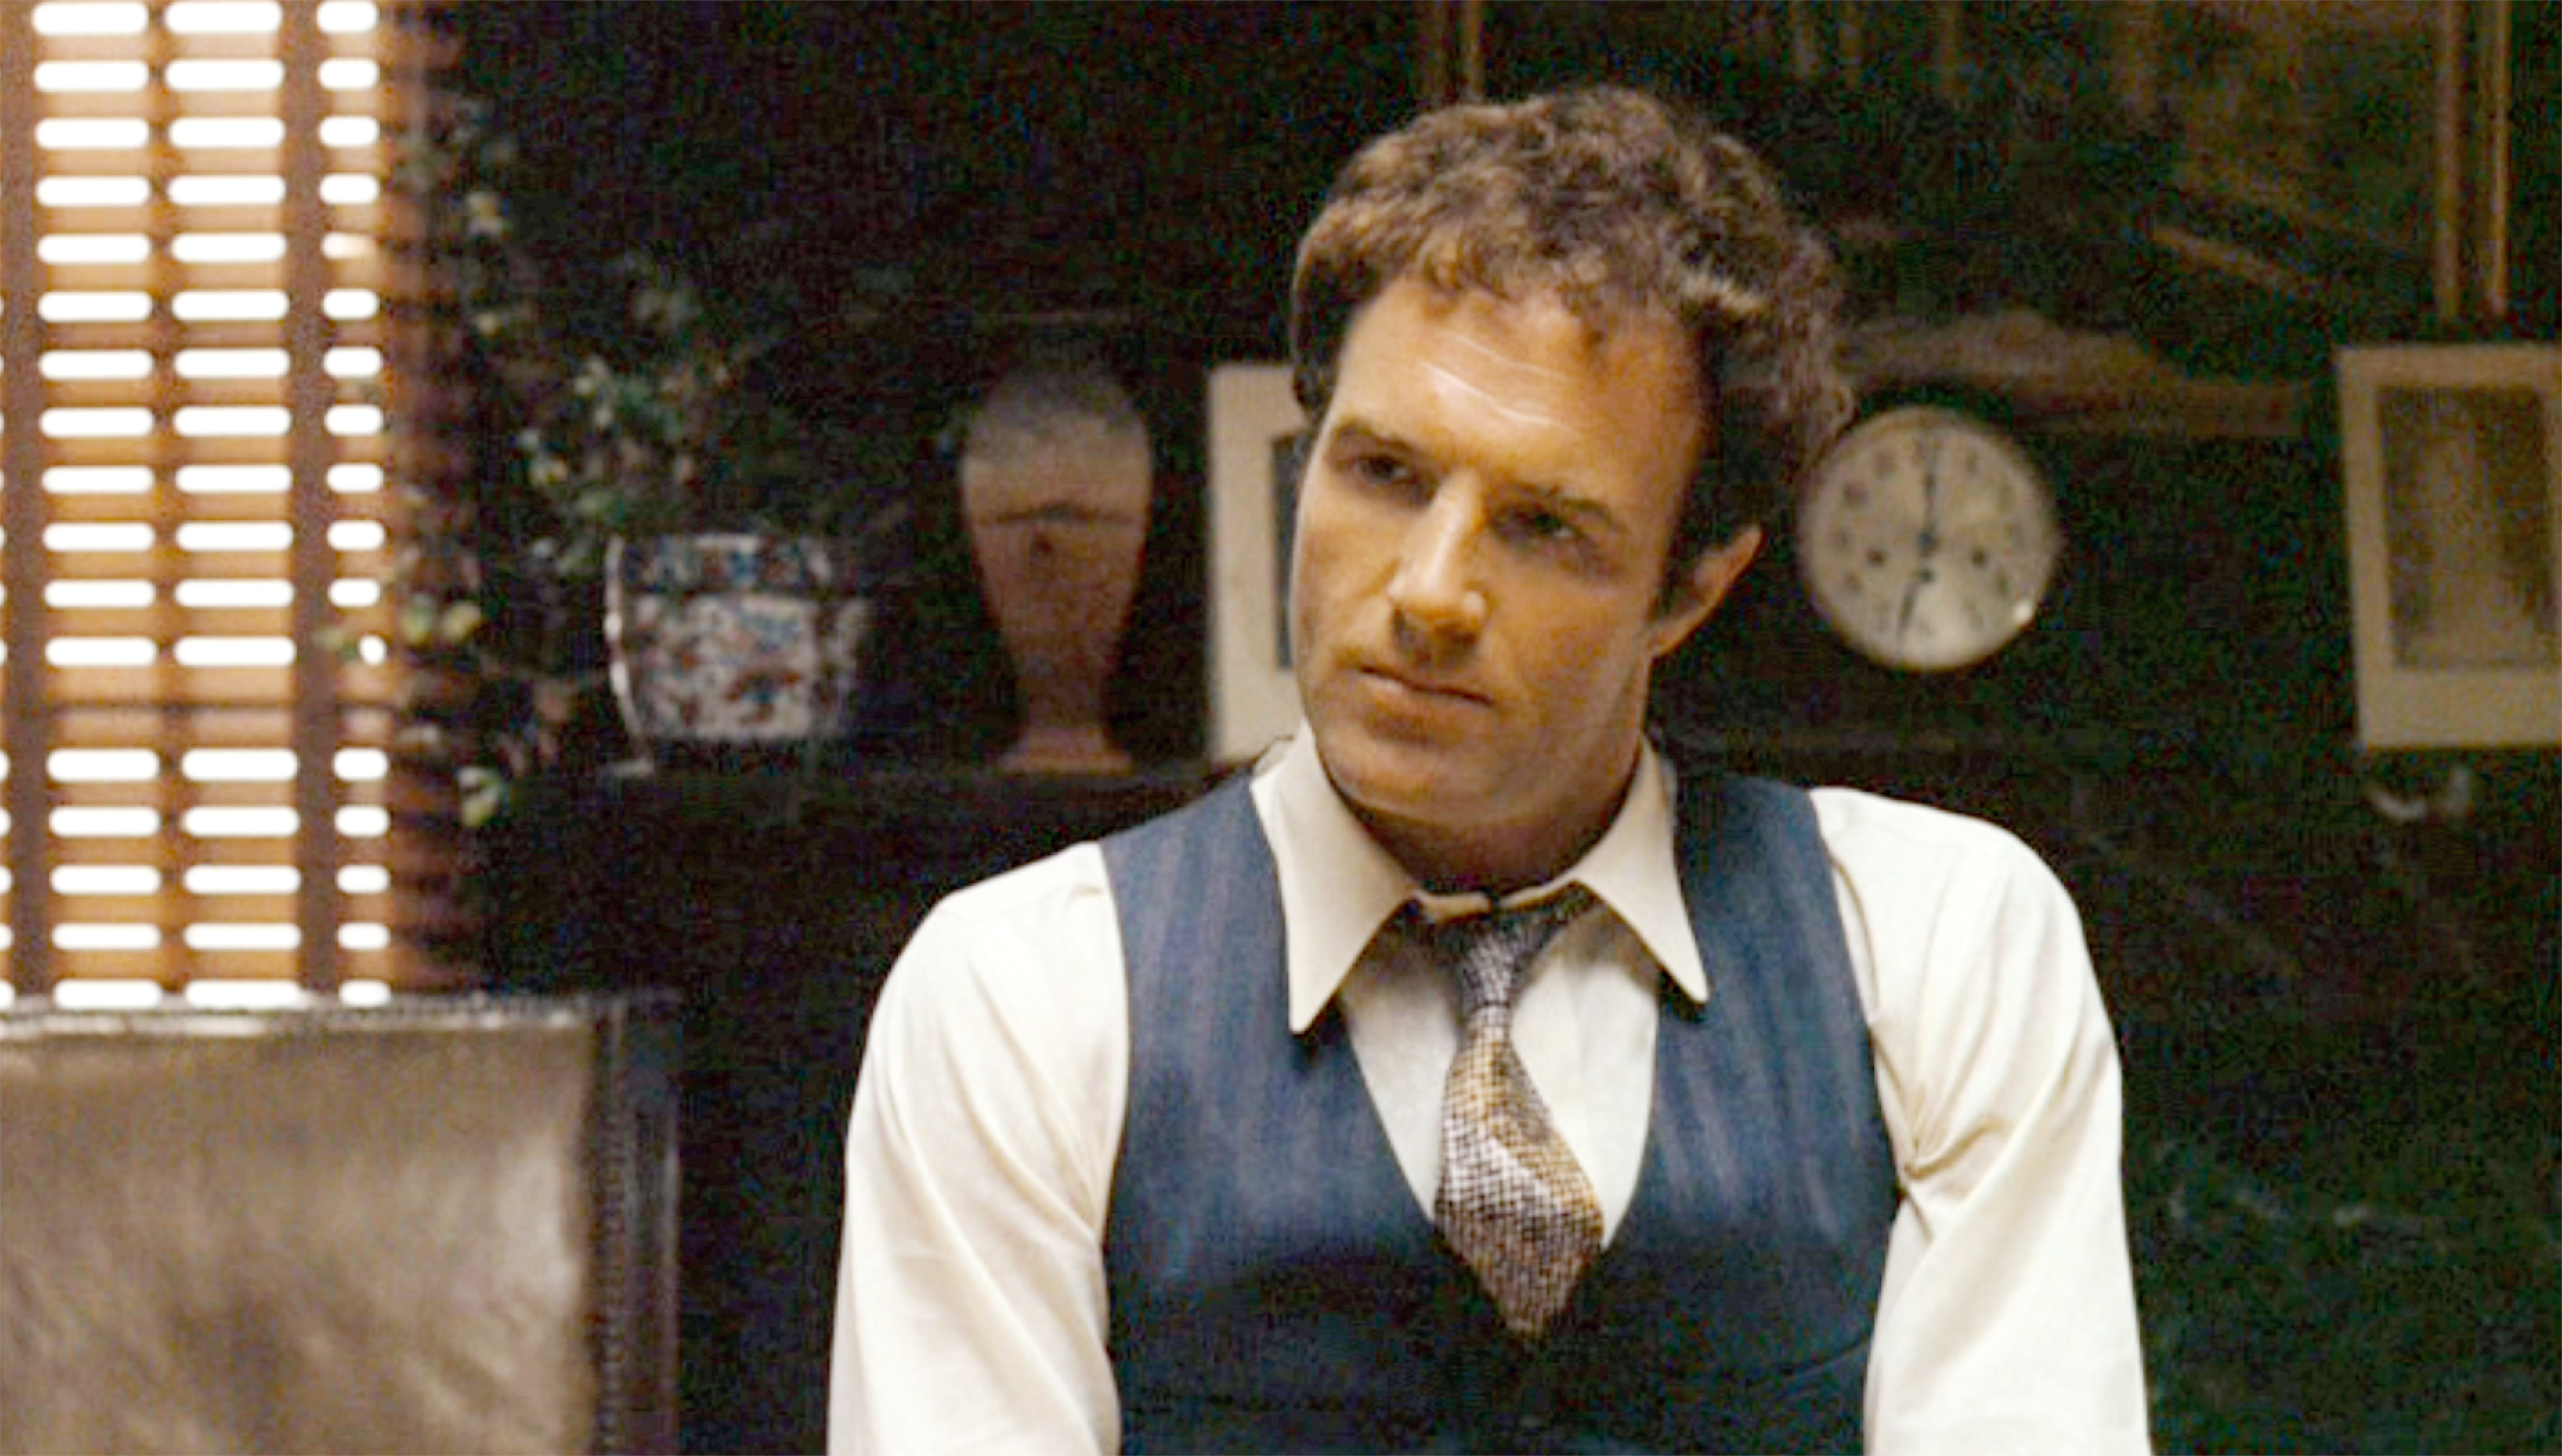 James Caan as Santino 'Sonny' Corleone in "The Godfather" on March 15, 1972. | Source: Getty Images